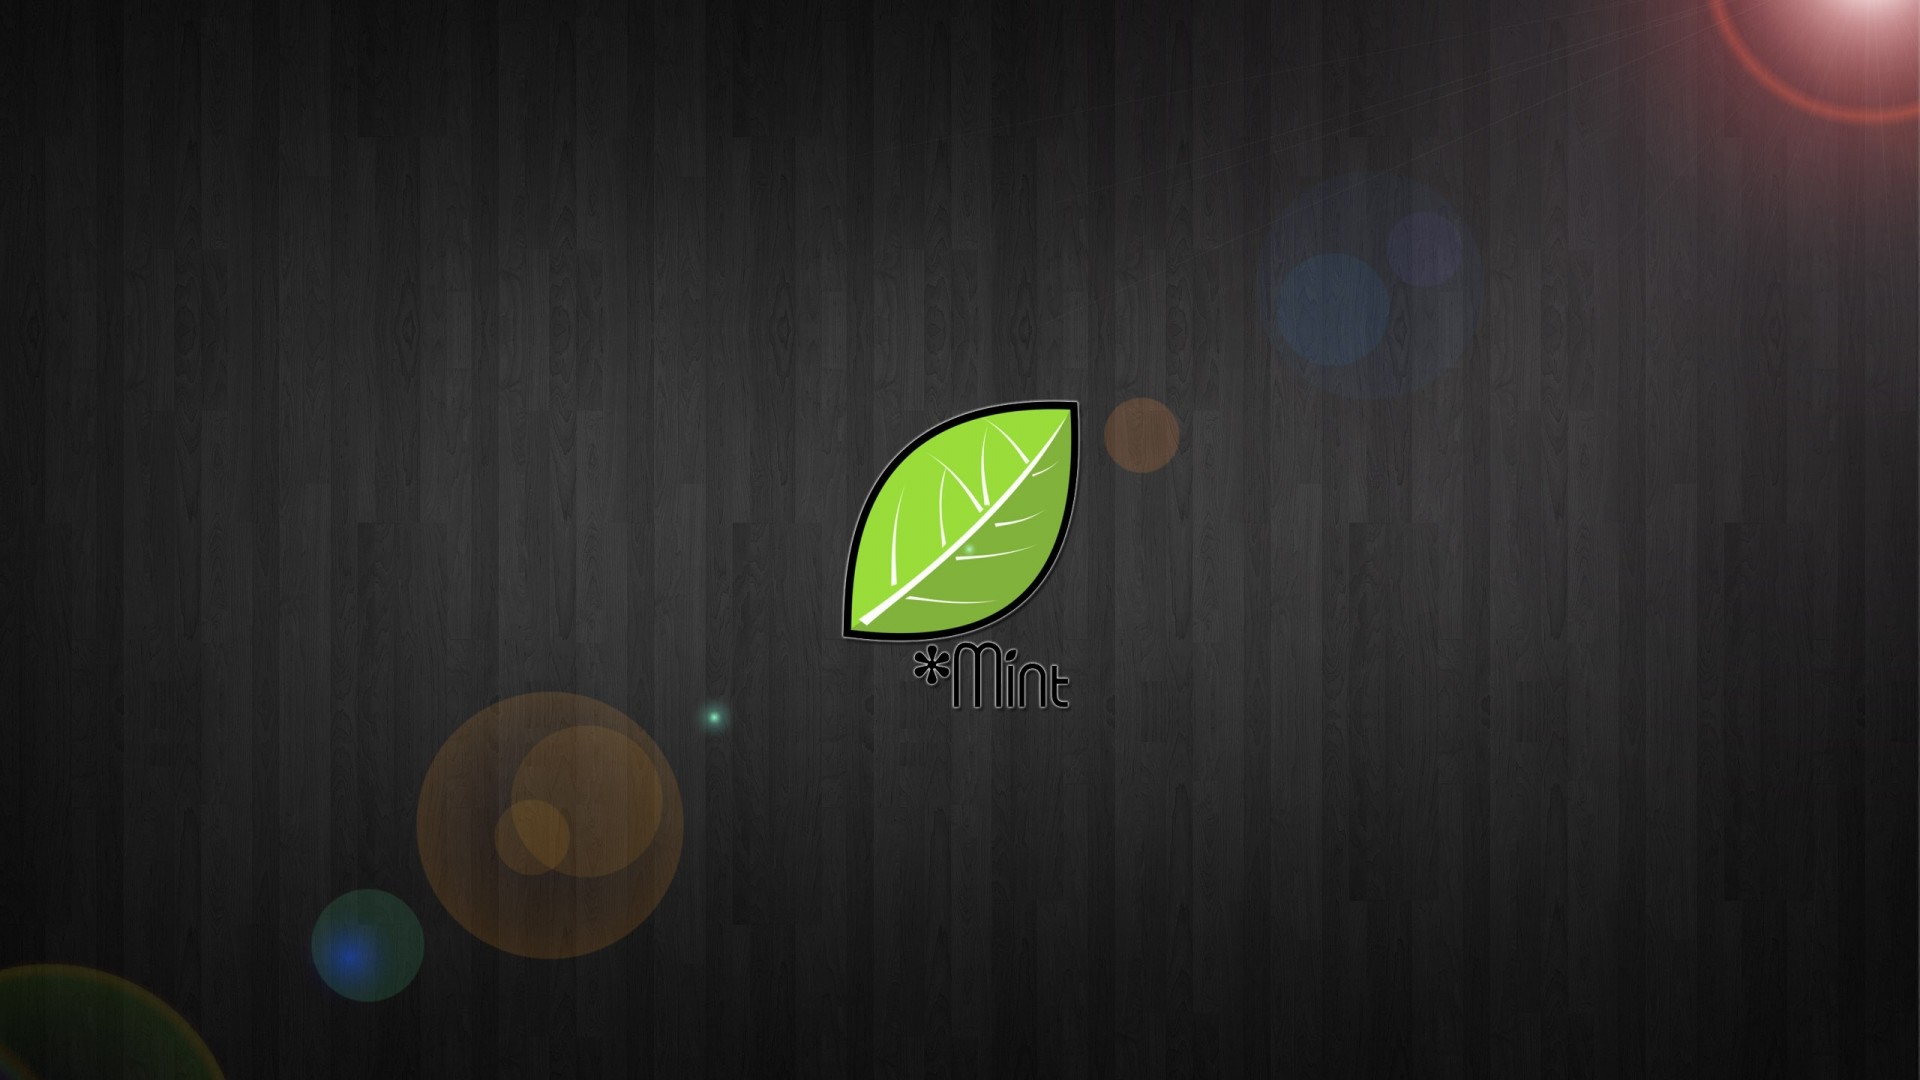 1920x1080 Linux Mint 15 Olivia (Cinnamon) Review | Adorable Wallpapers | Pinterest |  Linux mint and Wallpaper